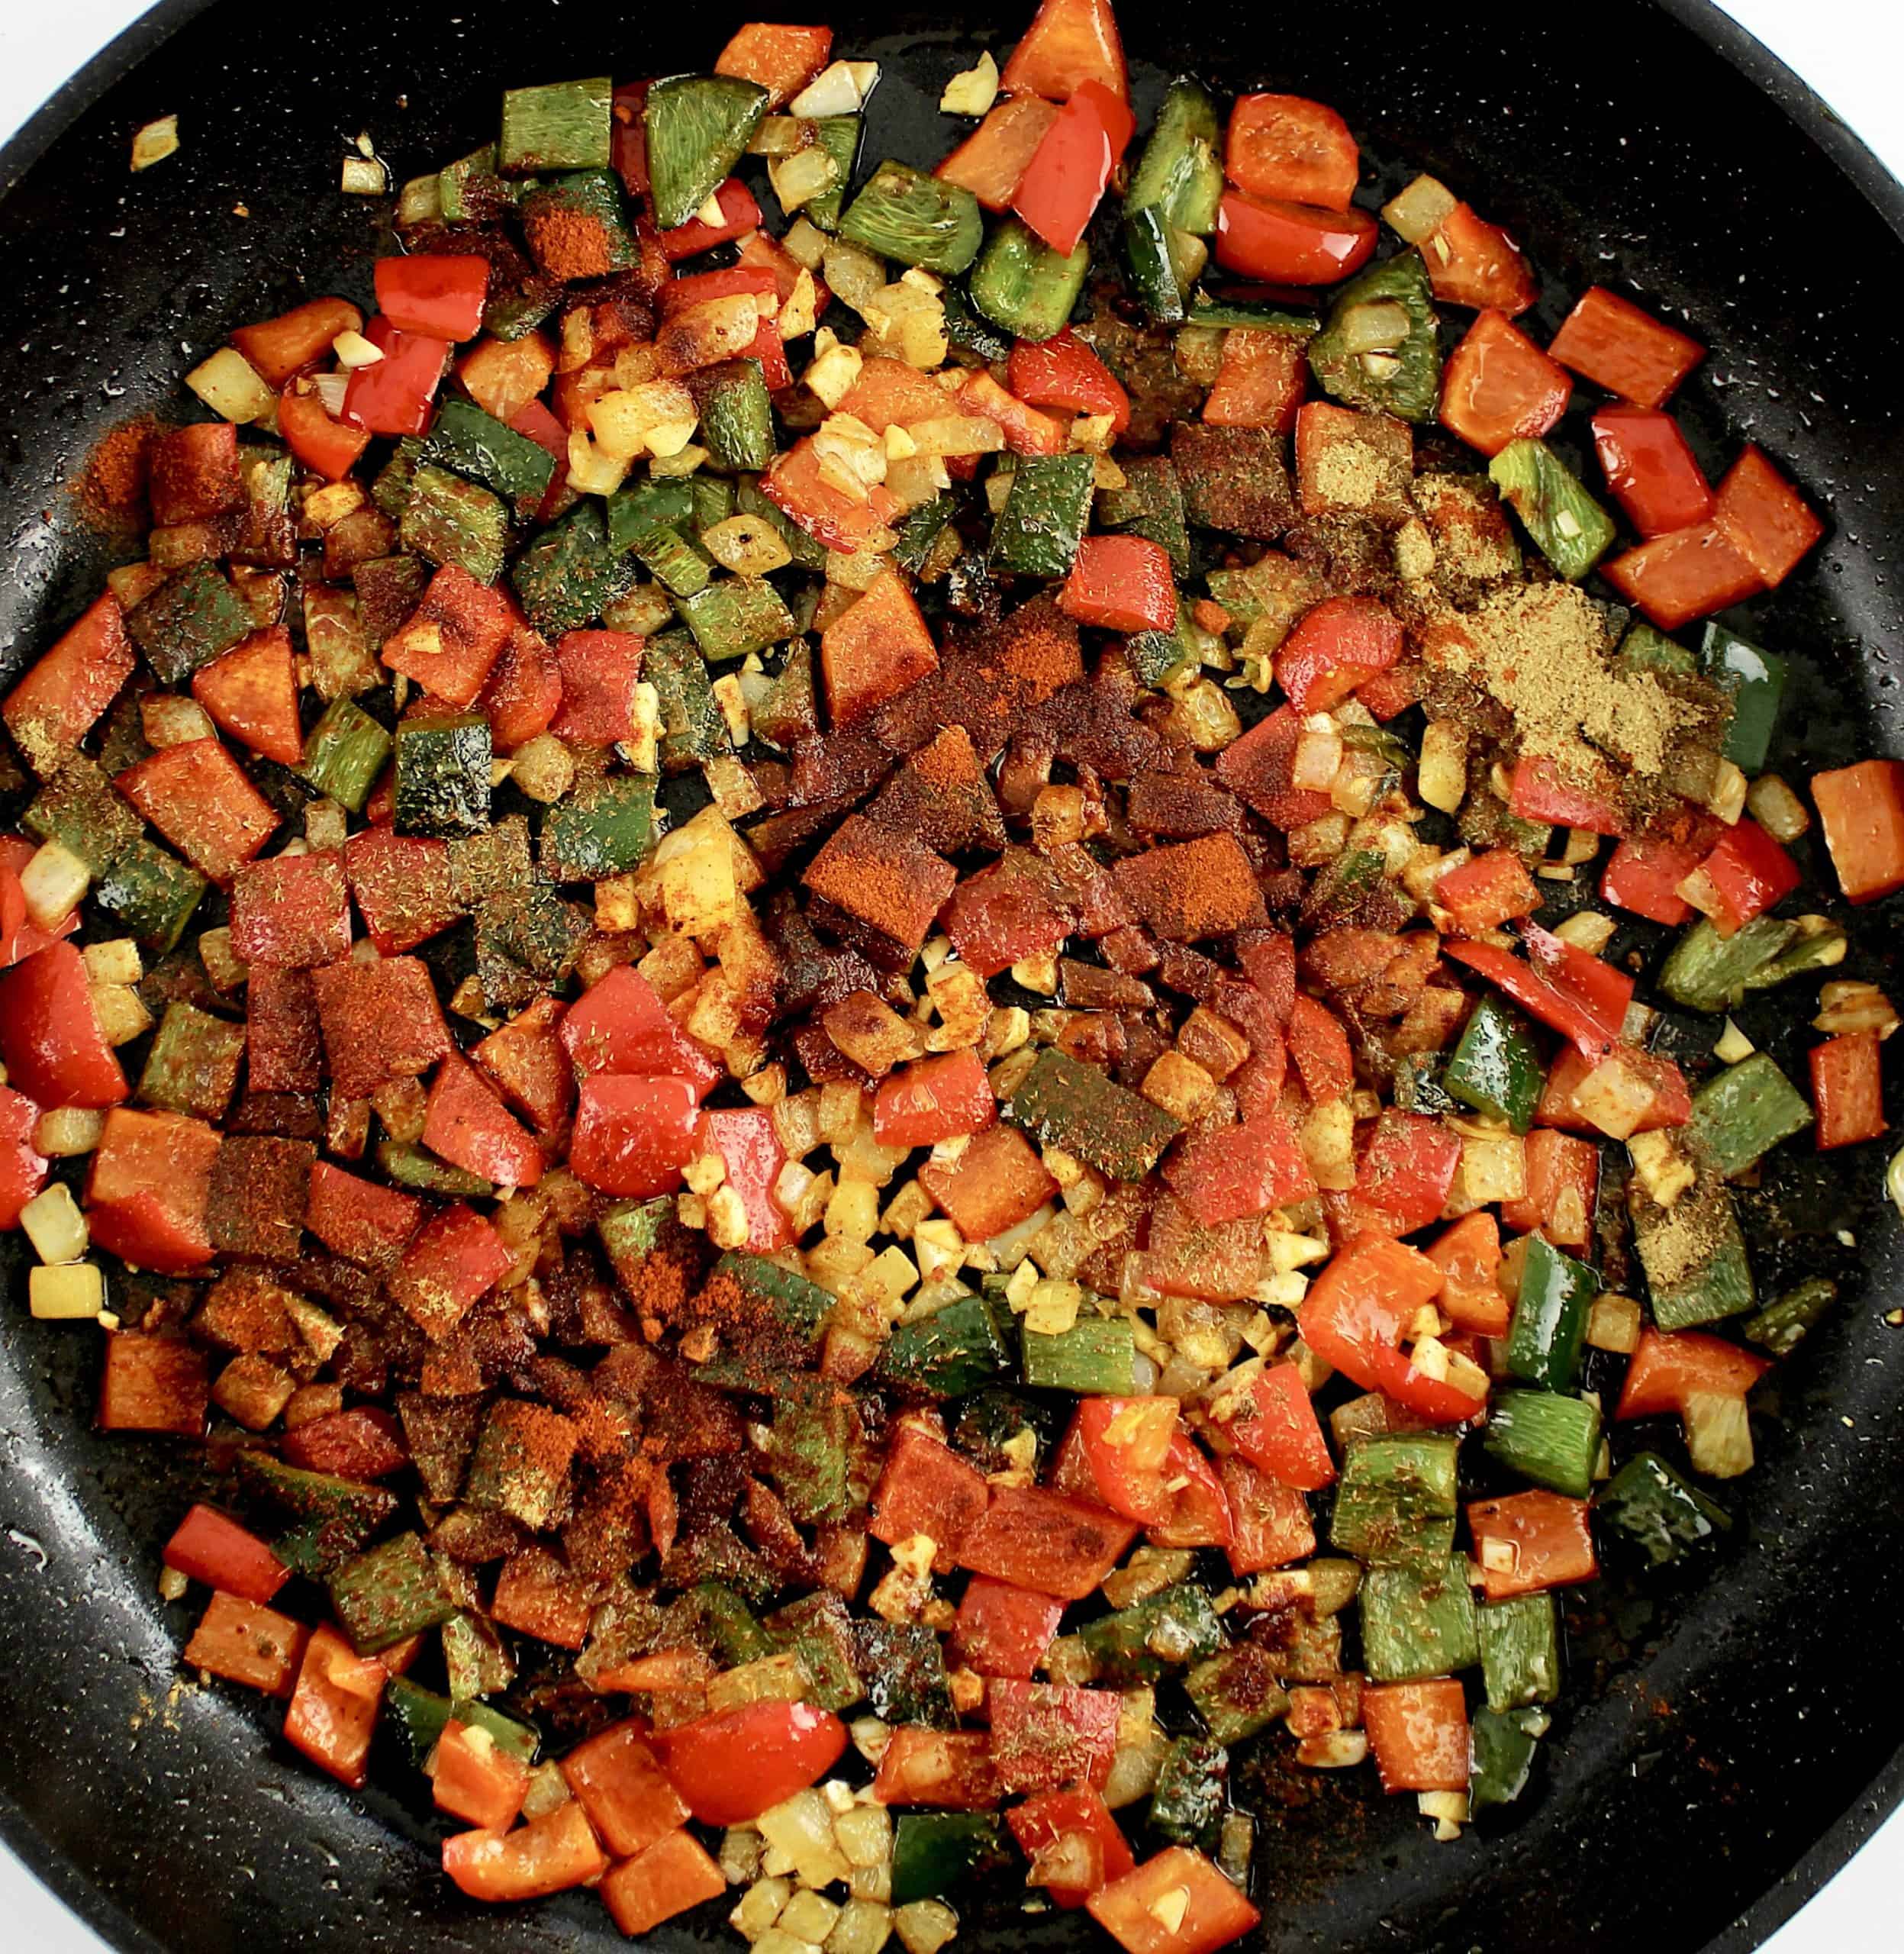 Sautéed peppers and onions with spices toasting in skillet